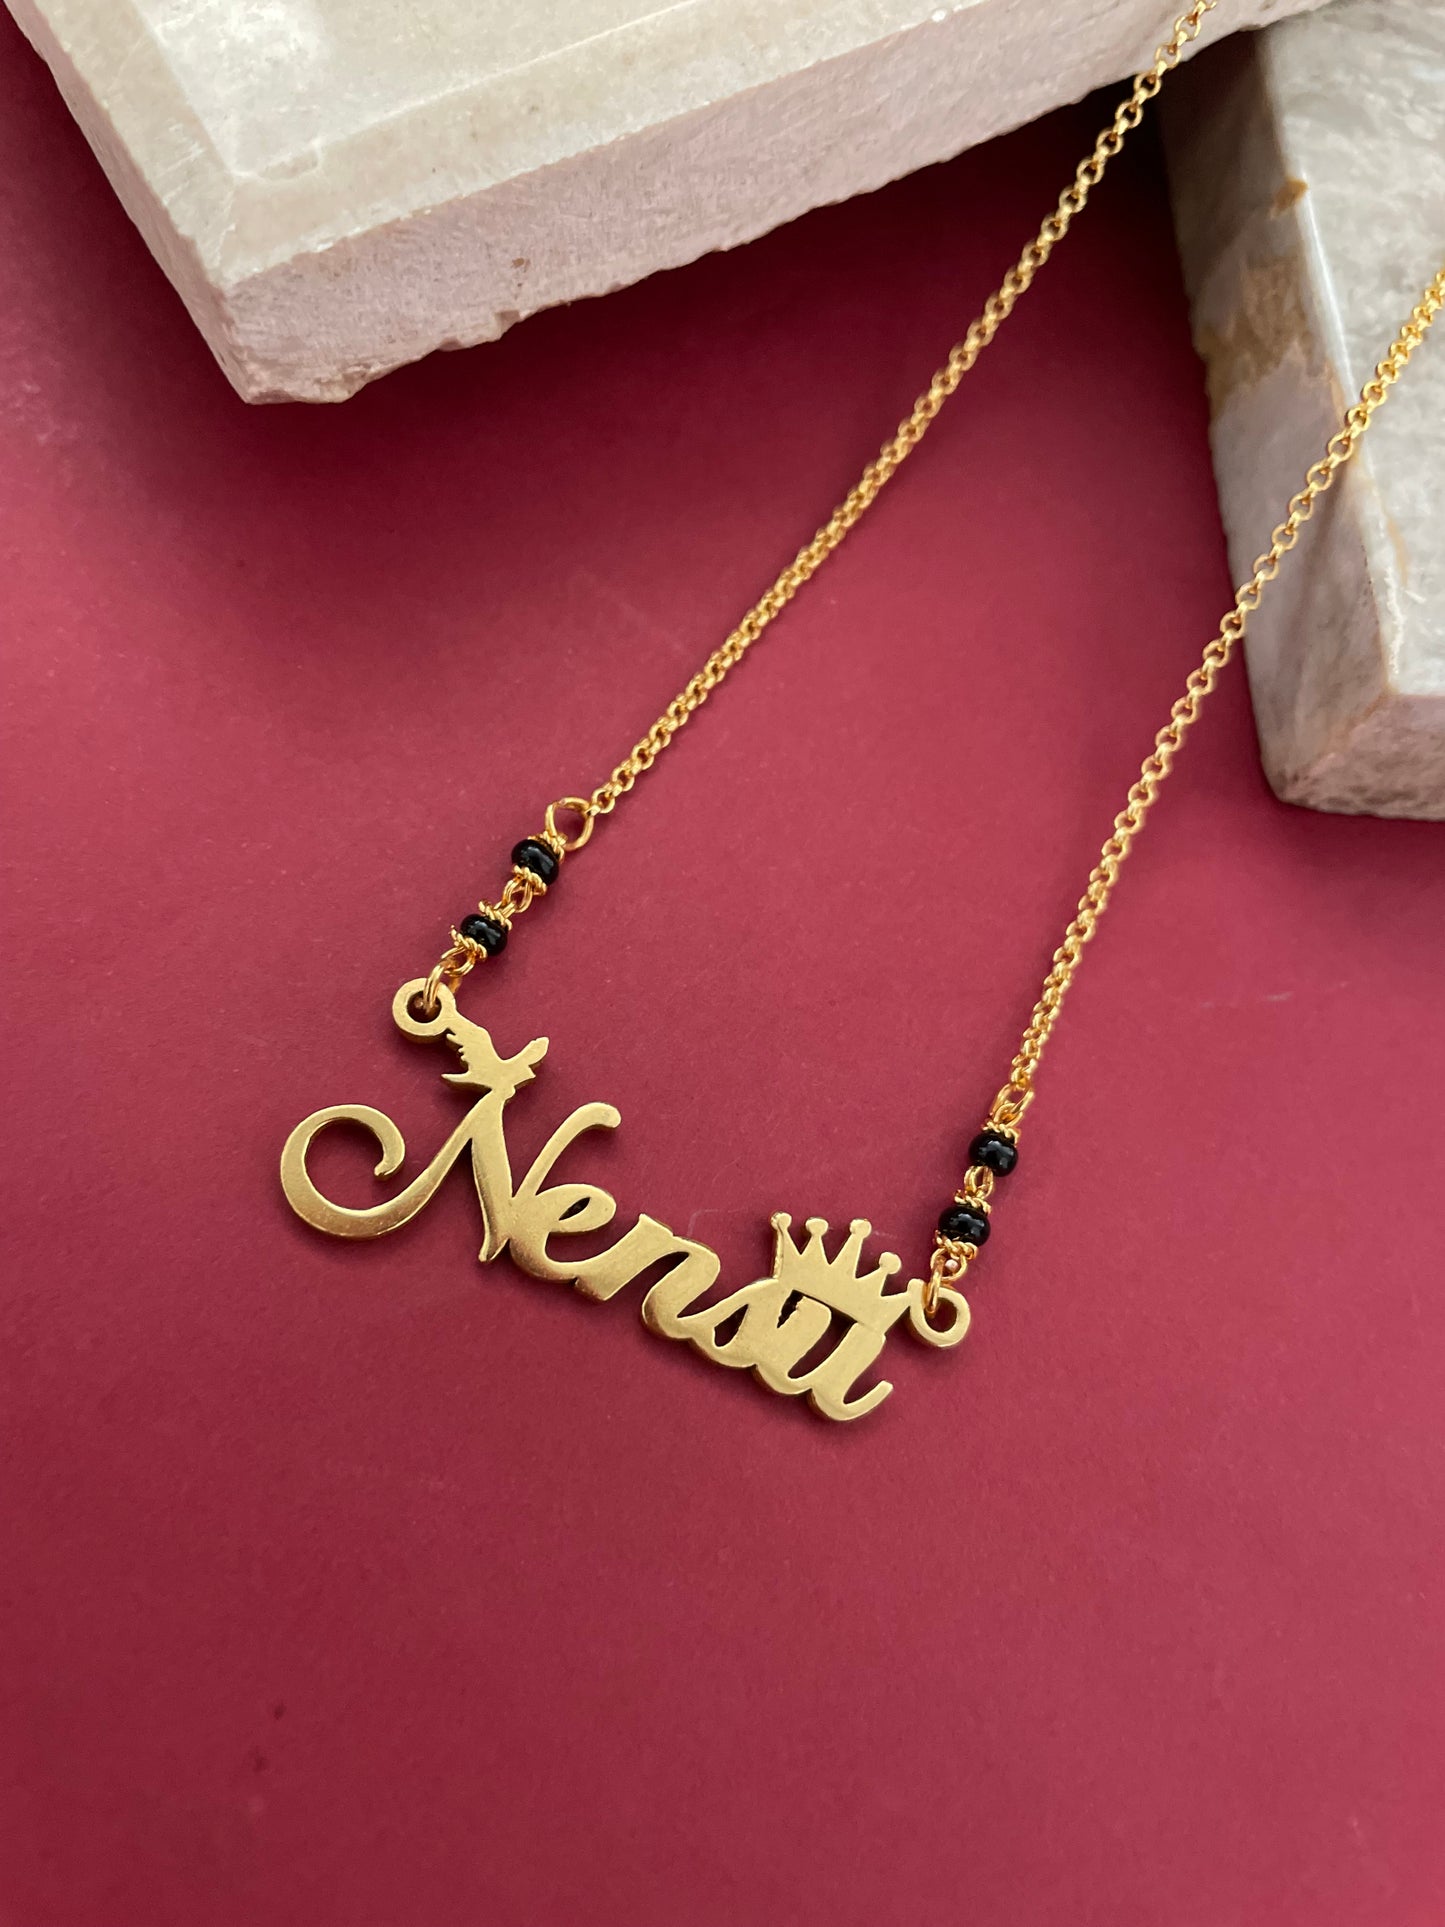 Classic Cursive Name Necklace/Short Mangalsutra With a Bird & Crown